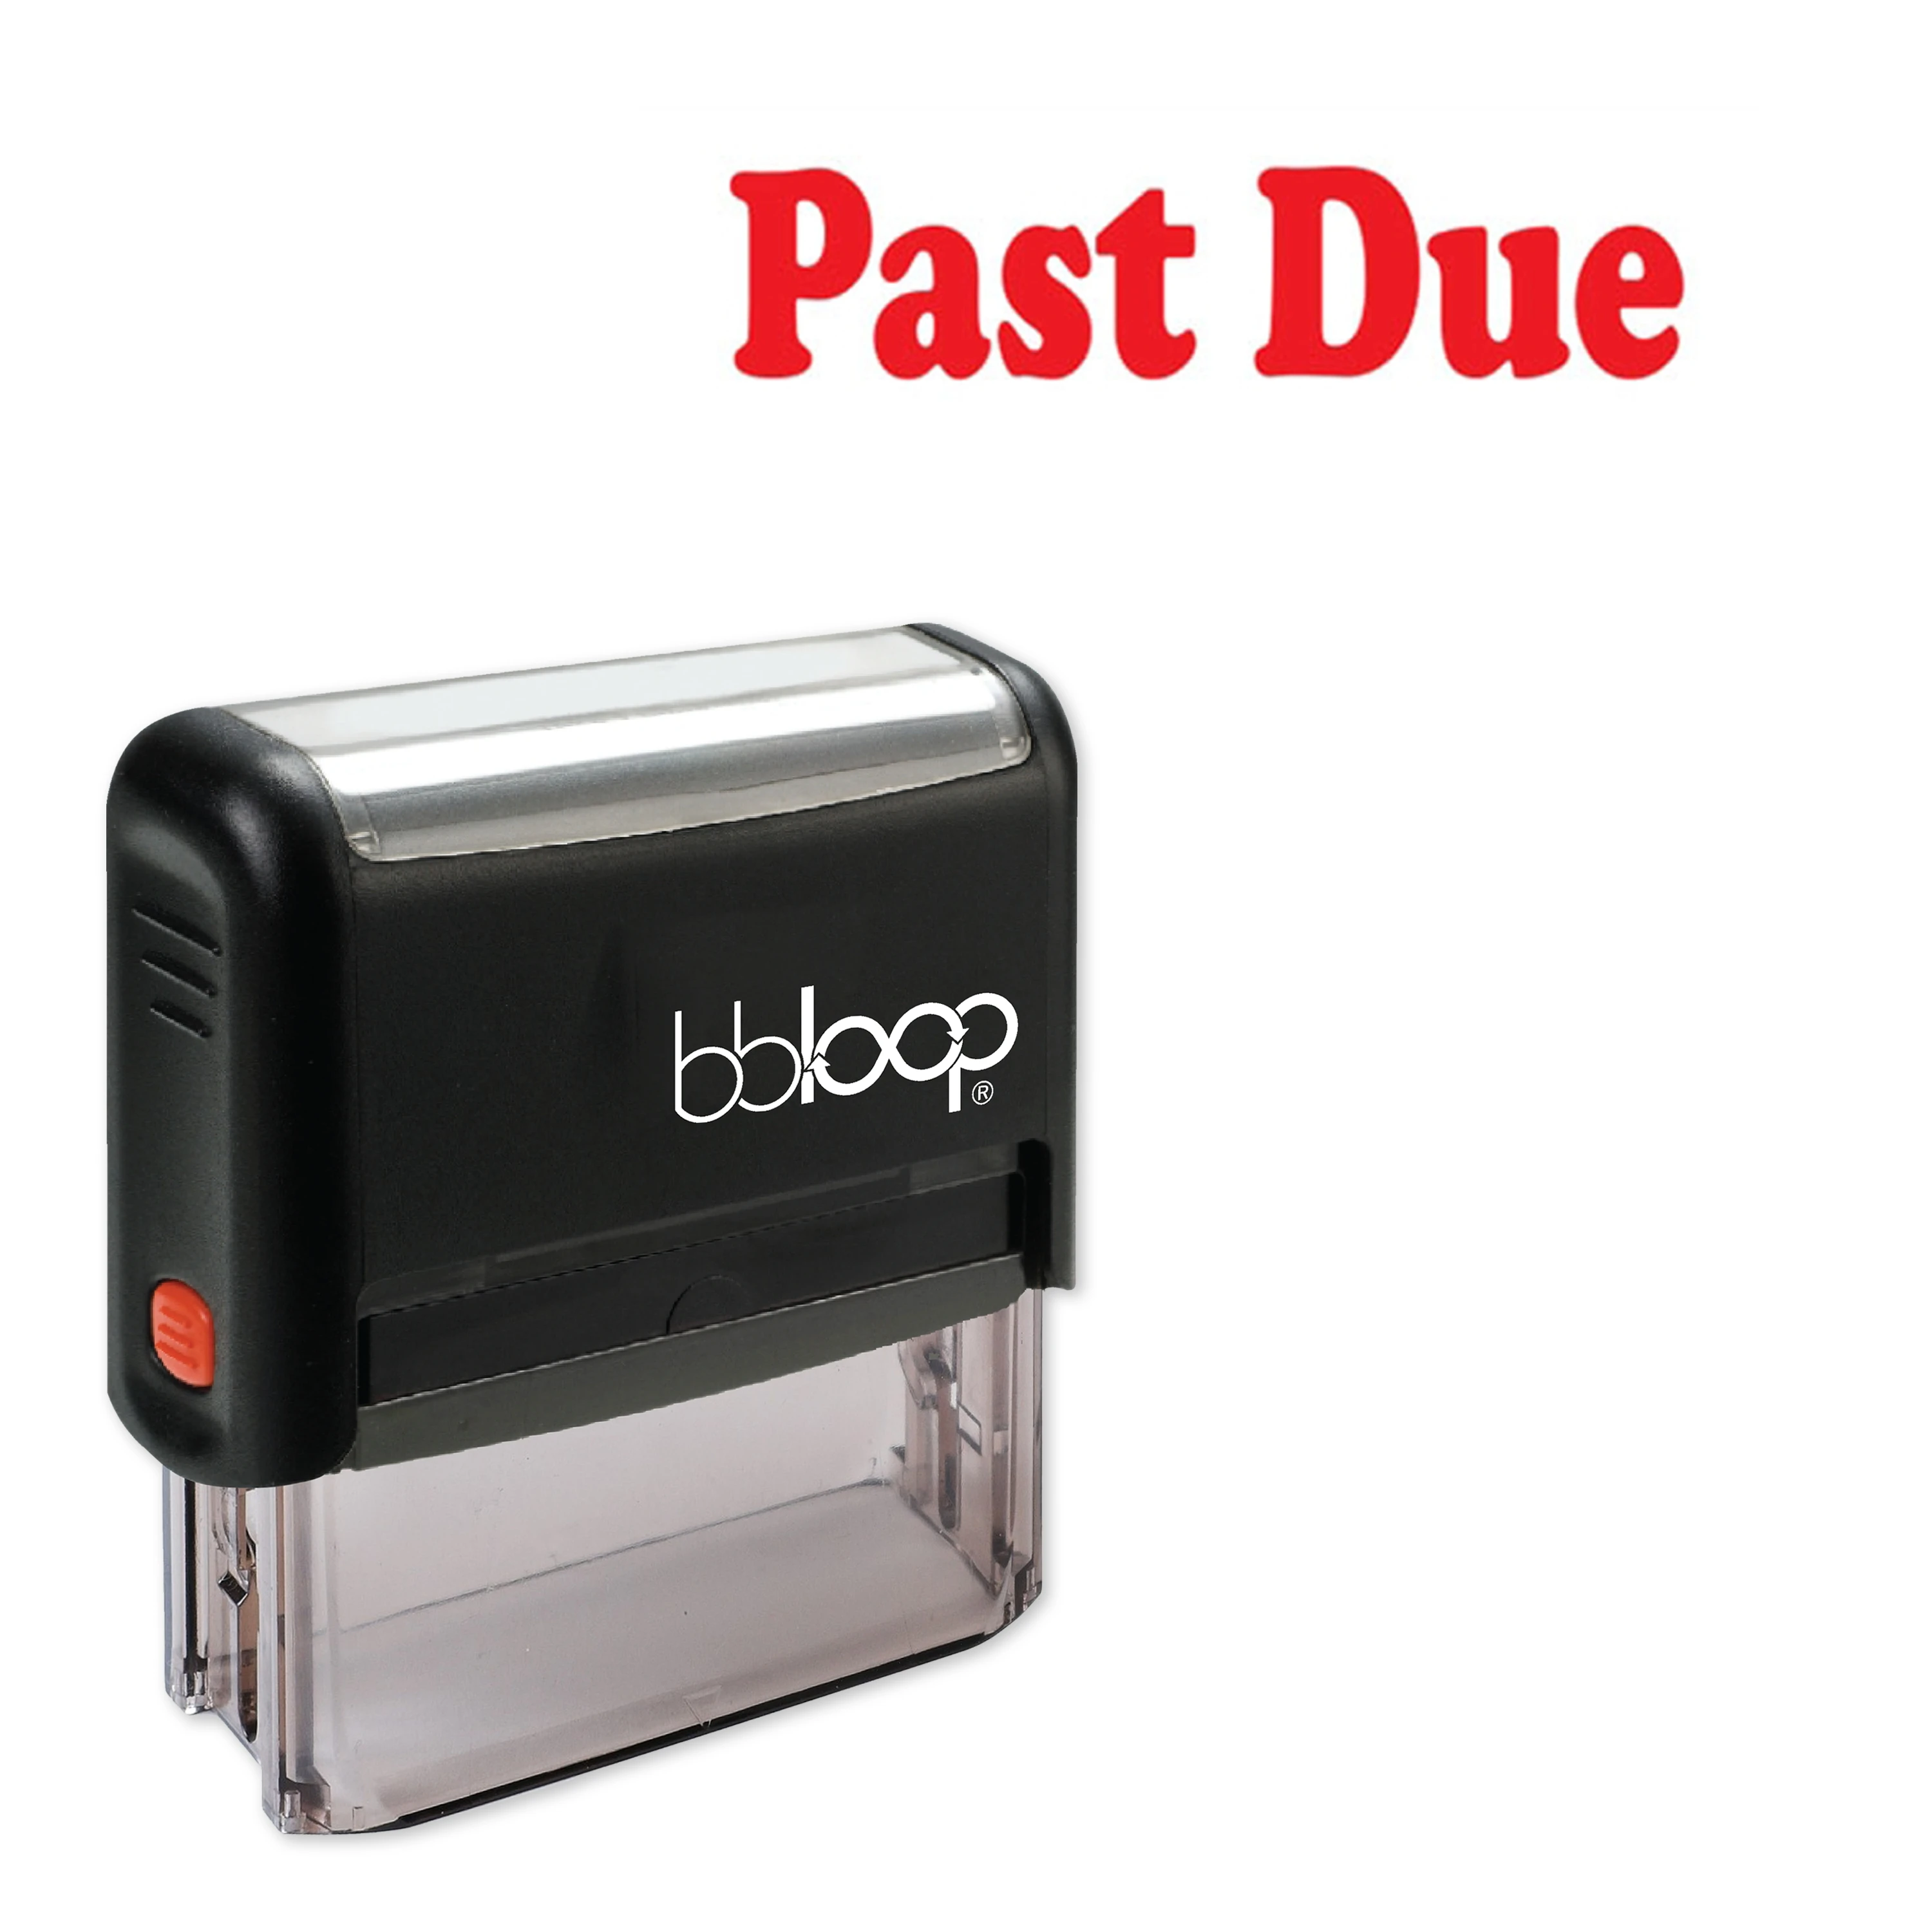 

Bbloop "Past Due" Self-Inking Rubber Stamp